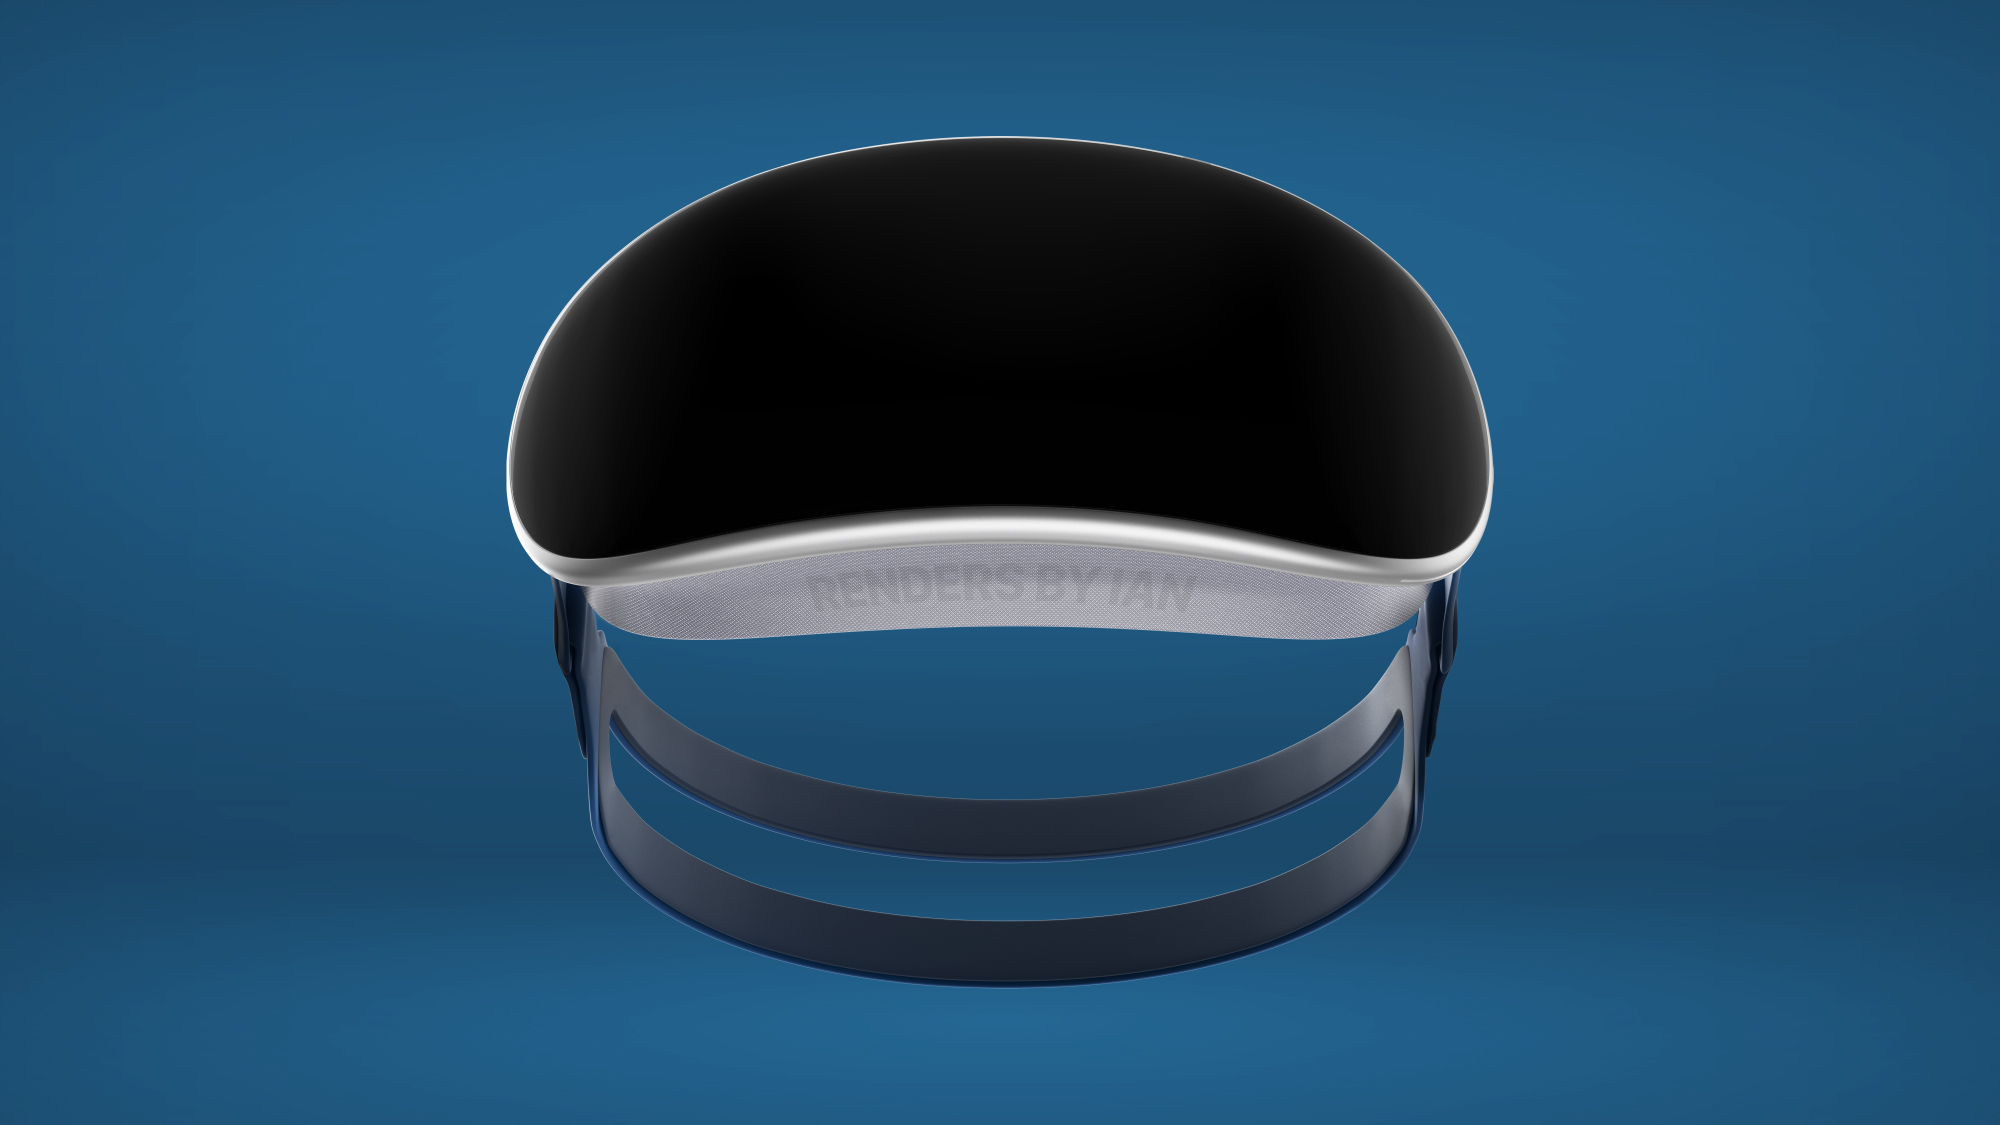 Apple VR and mixed reality headset fans render front view on blue background